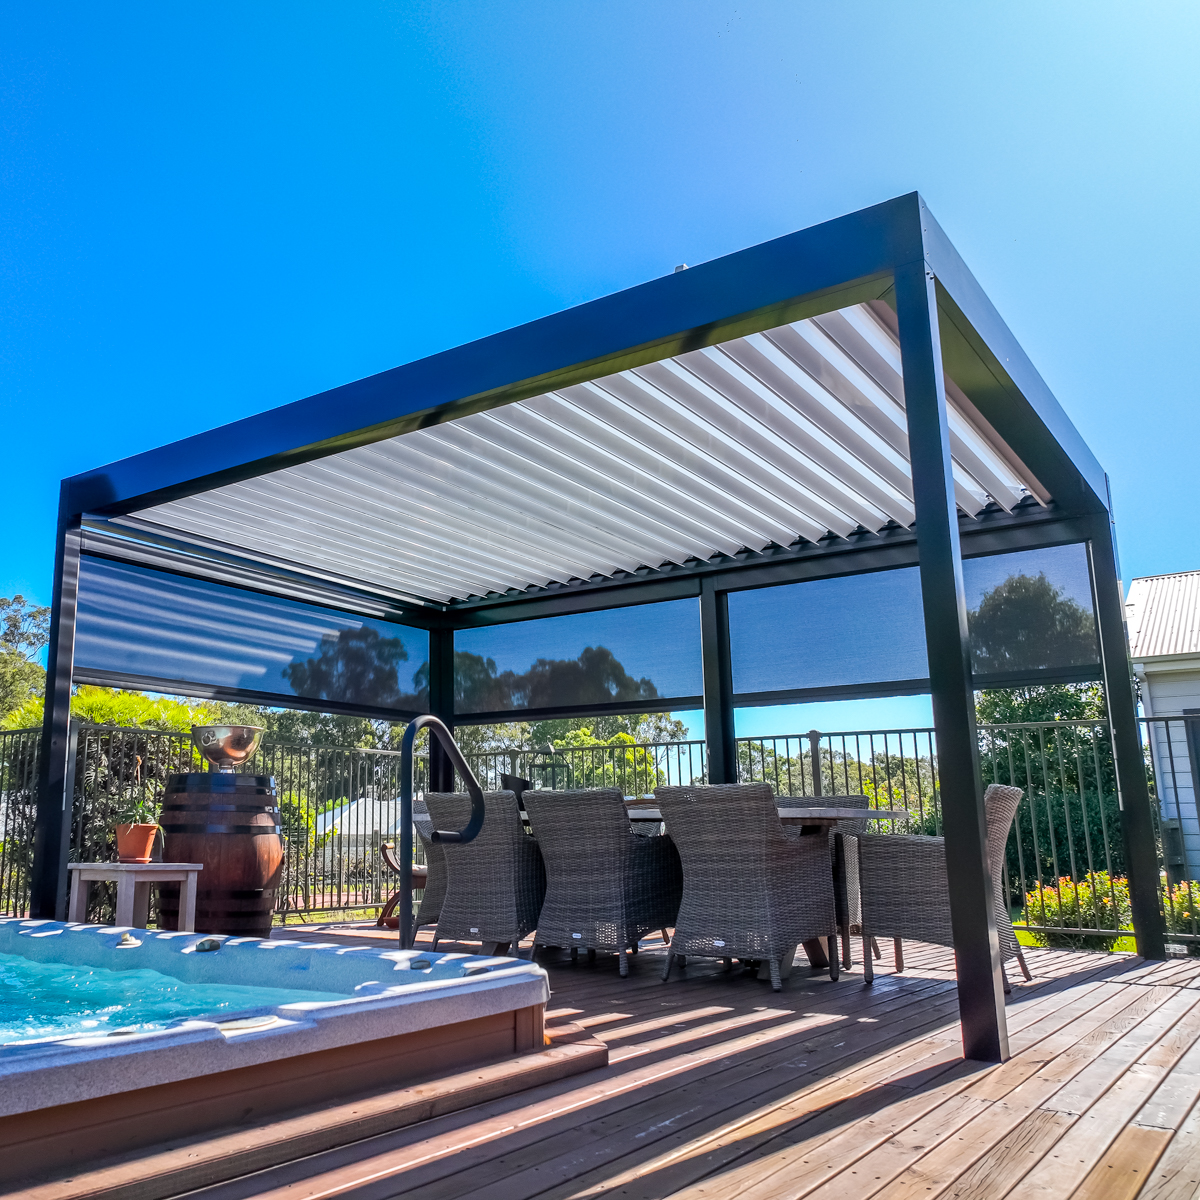 Stratco awning with automatic louvred roof and retractable blinds